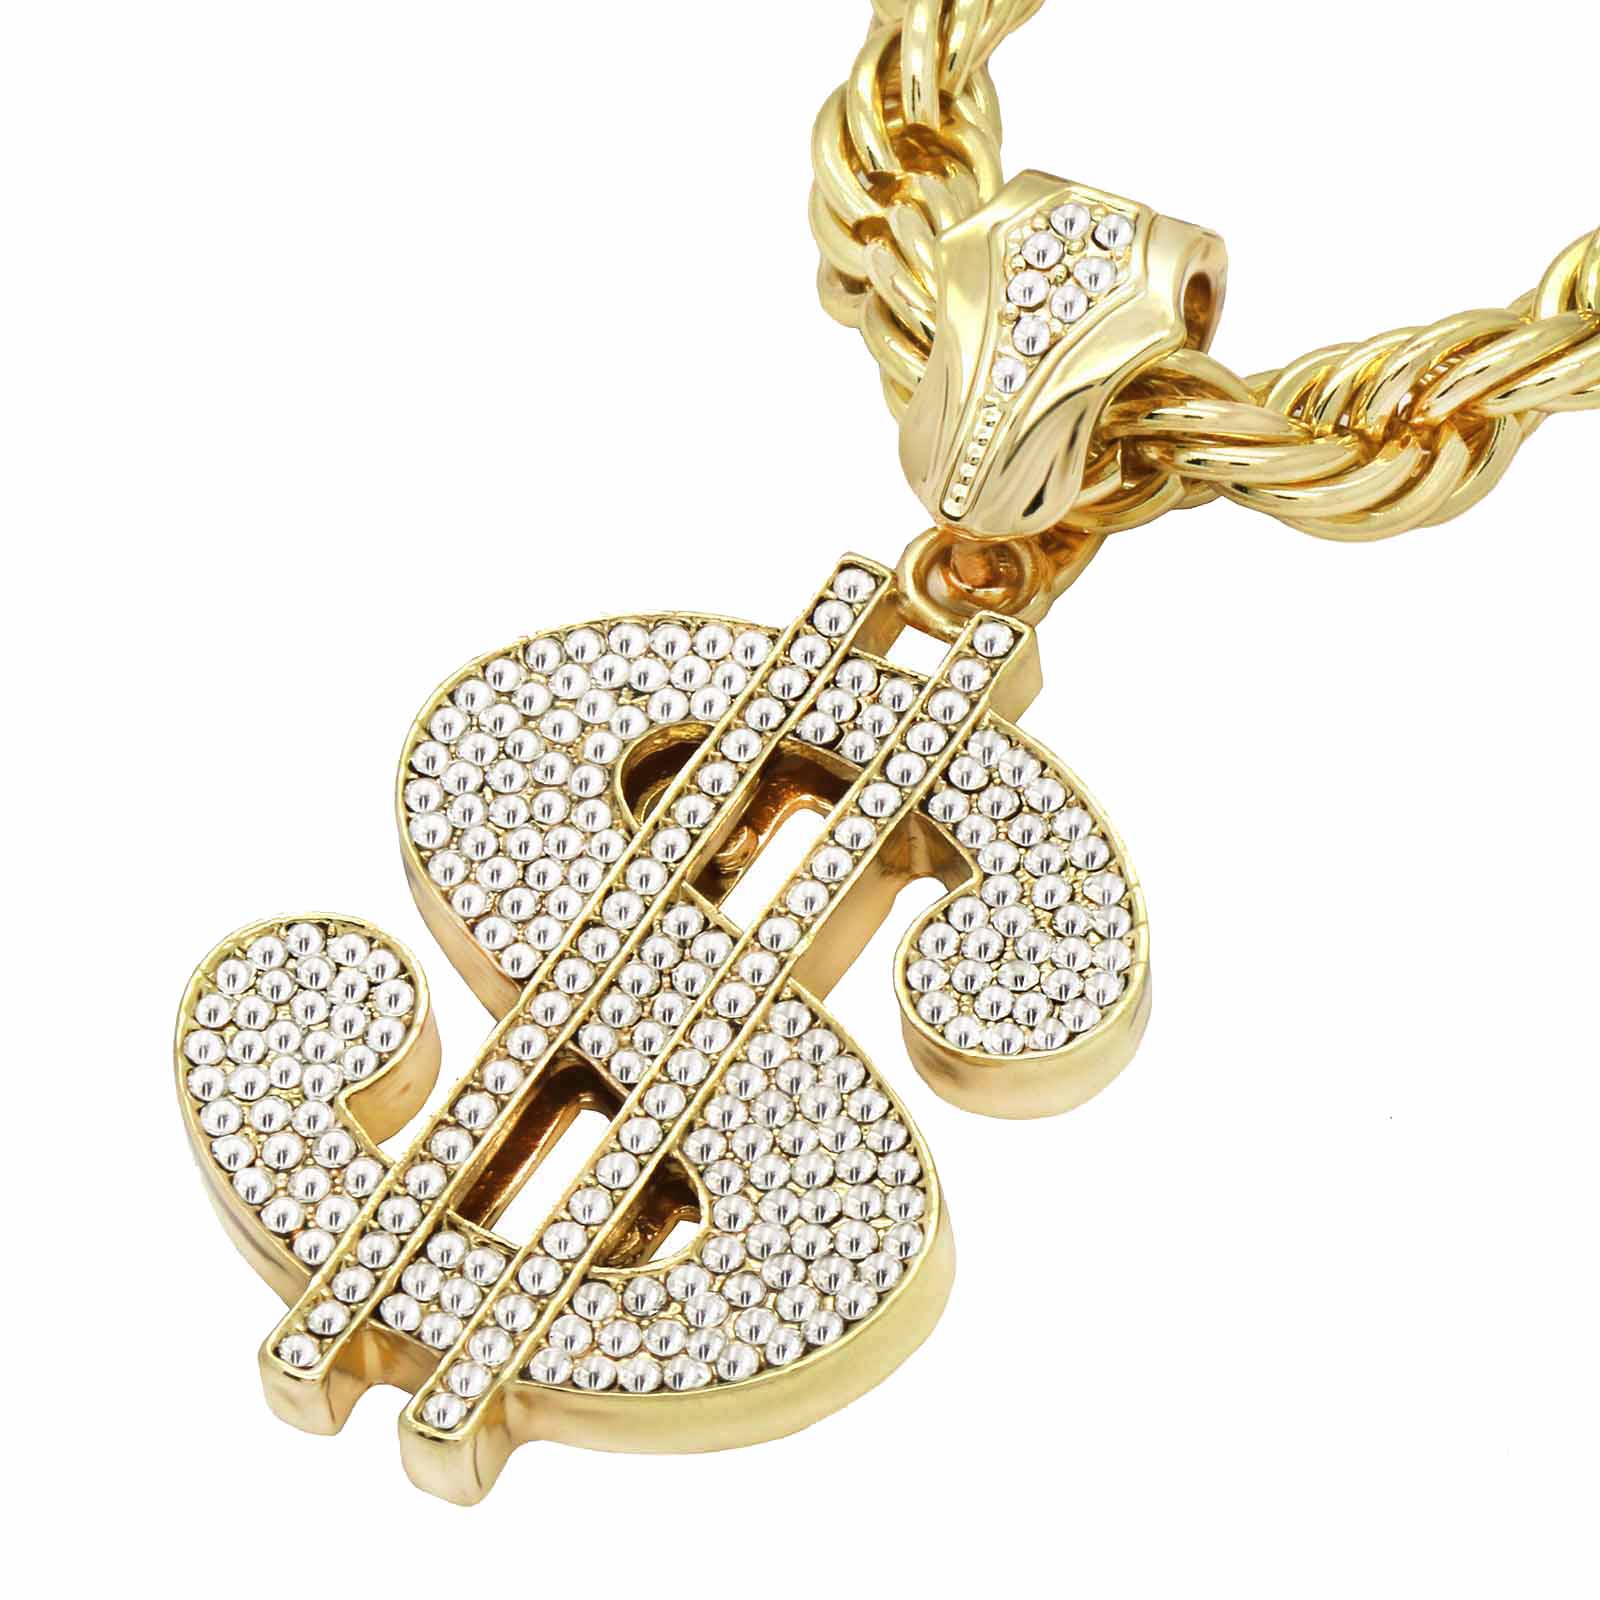 Gold Dollar NECKLACE